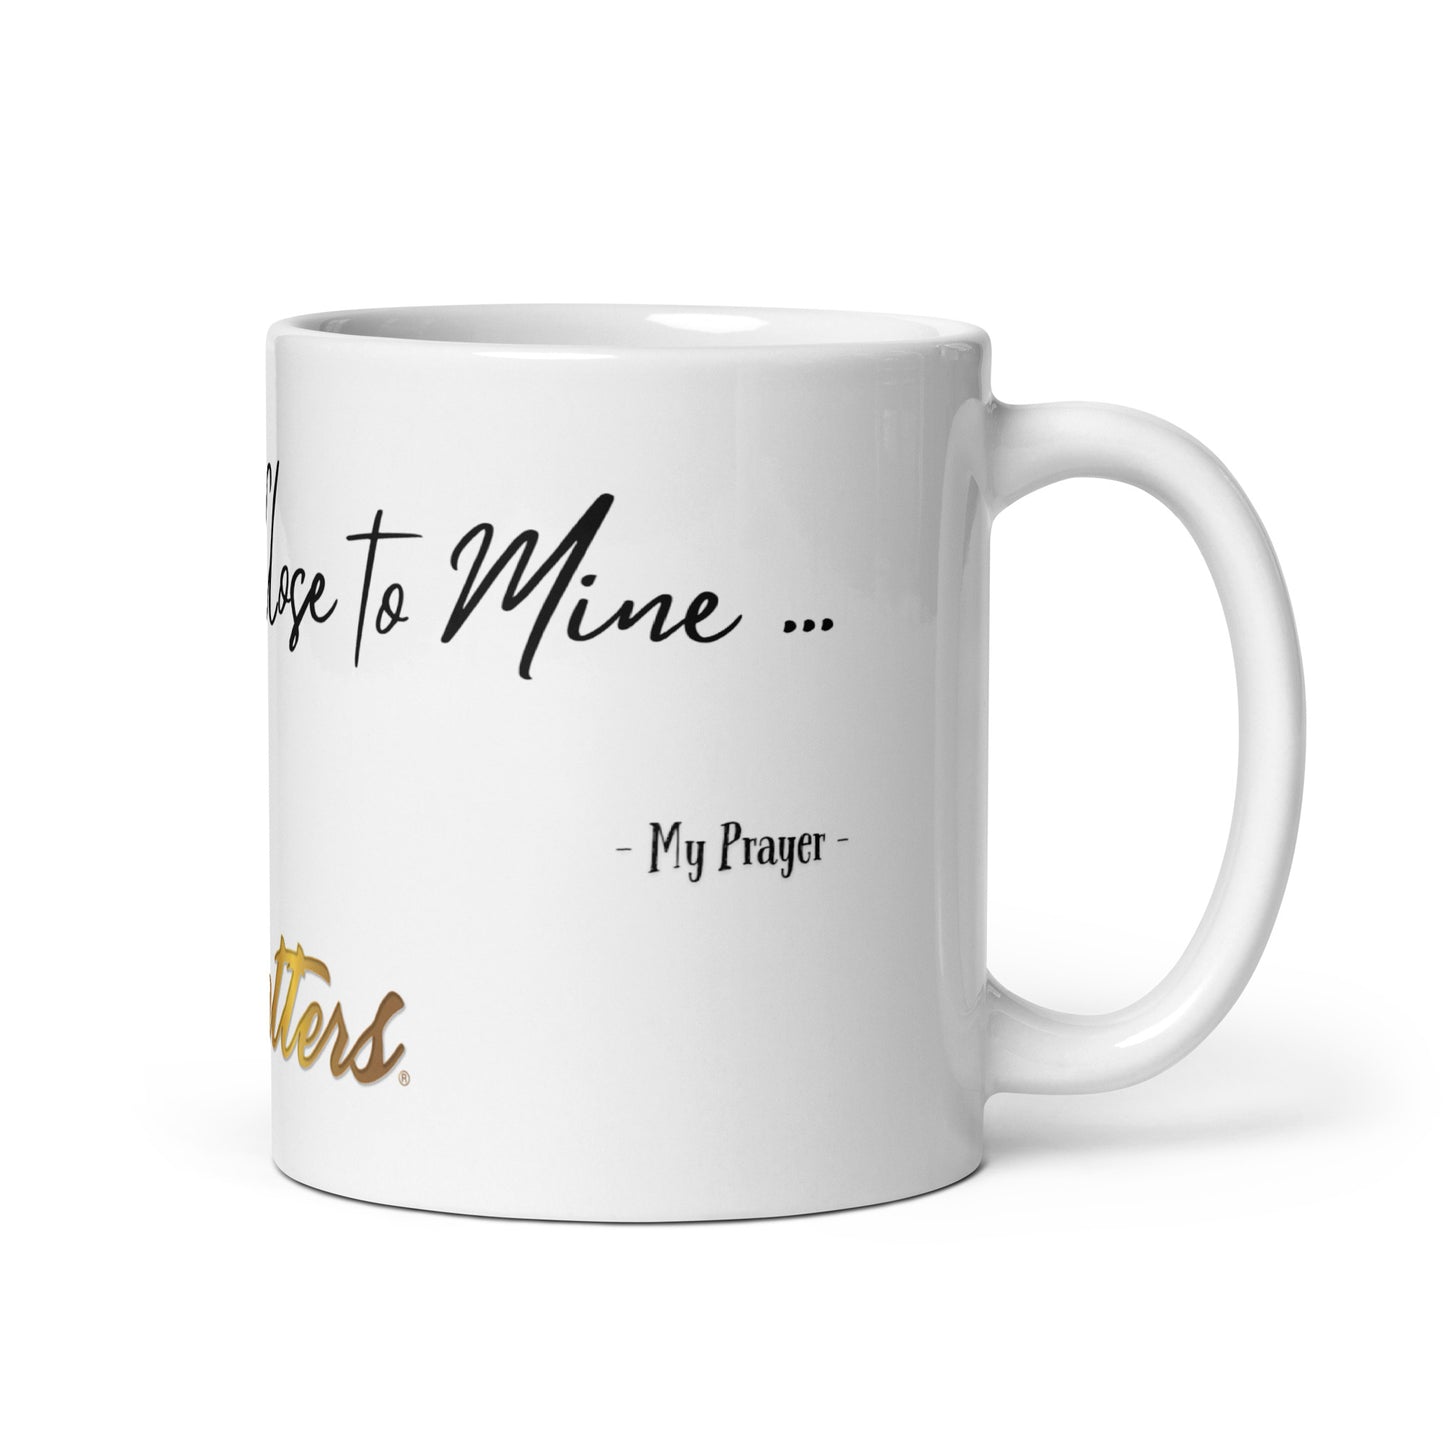 The Platters®️ "Your Lips Close To Mine" White Glossy Mug